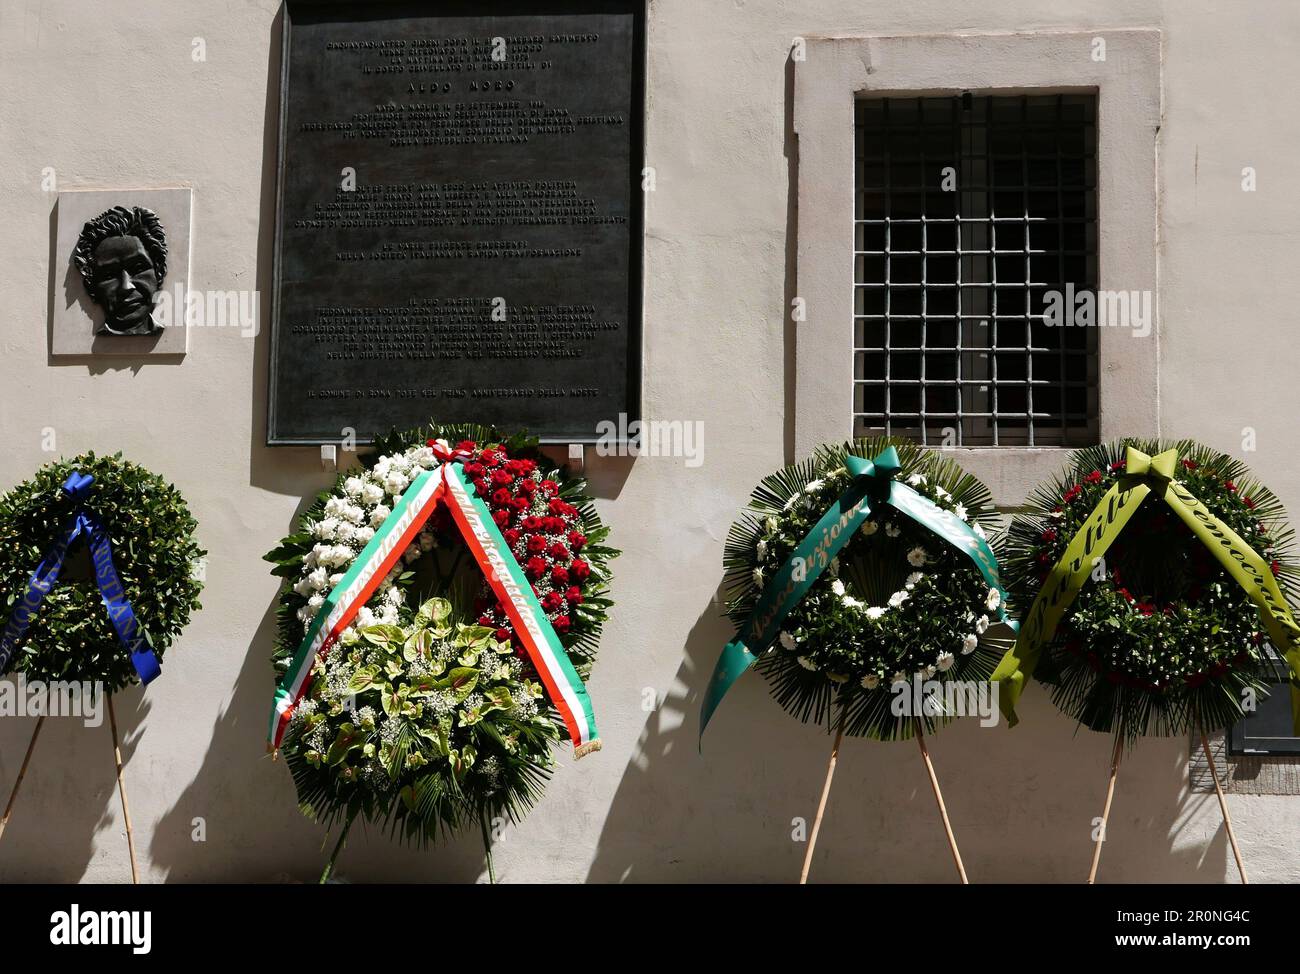 Flowers are left in the morning by President Sergio Mattarella on behalf of  Italian Republic under the memorial stone of Aldo Moro, via Michelangelo Caetani, Rome, Italy, May 9, 2023. Aldo Moro, at those times President of Democrazia Cristiana Party, was kidnapped by Brigate Rosse, a lefty terrorist organization, on march, 16, 1978. His body was found in a parked car in via Michelangelo Caetani, not far from Communist Party's and Democrazia Cristiana's headquarters, on May 9, 1978. (Photo by Elisa Gestri/Sipa USA) Stock Photo